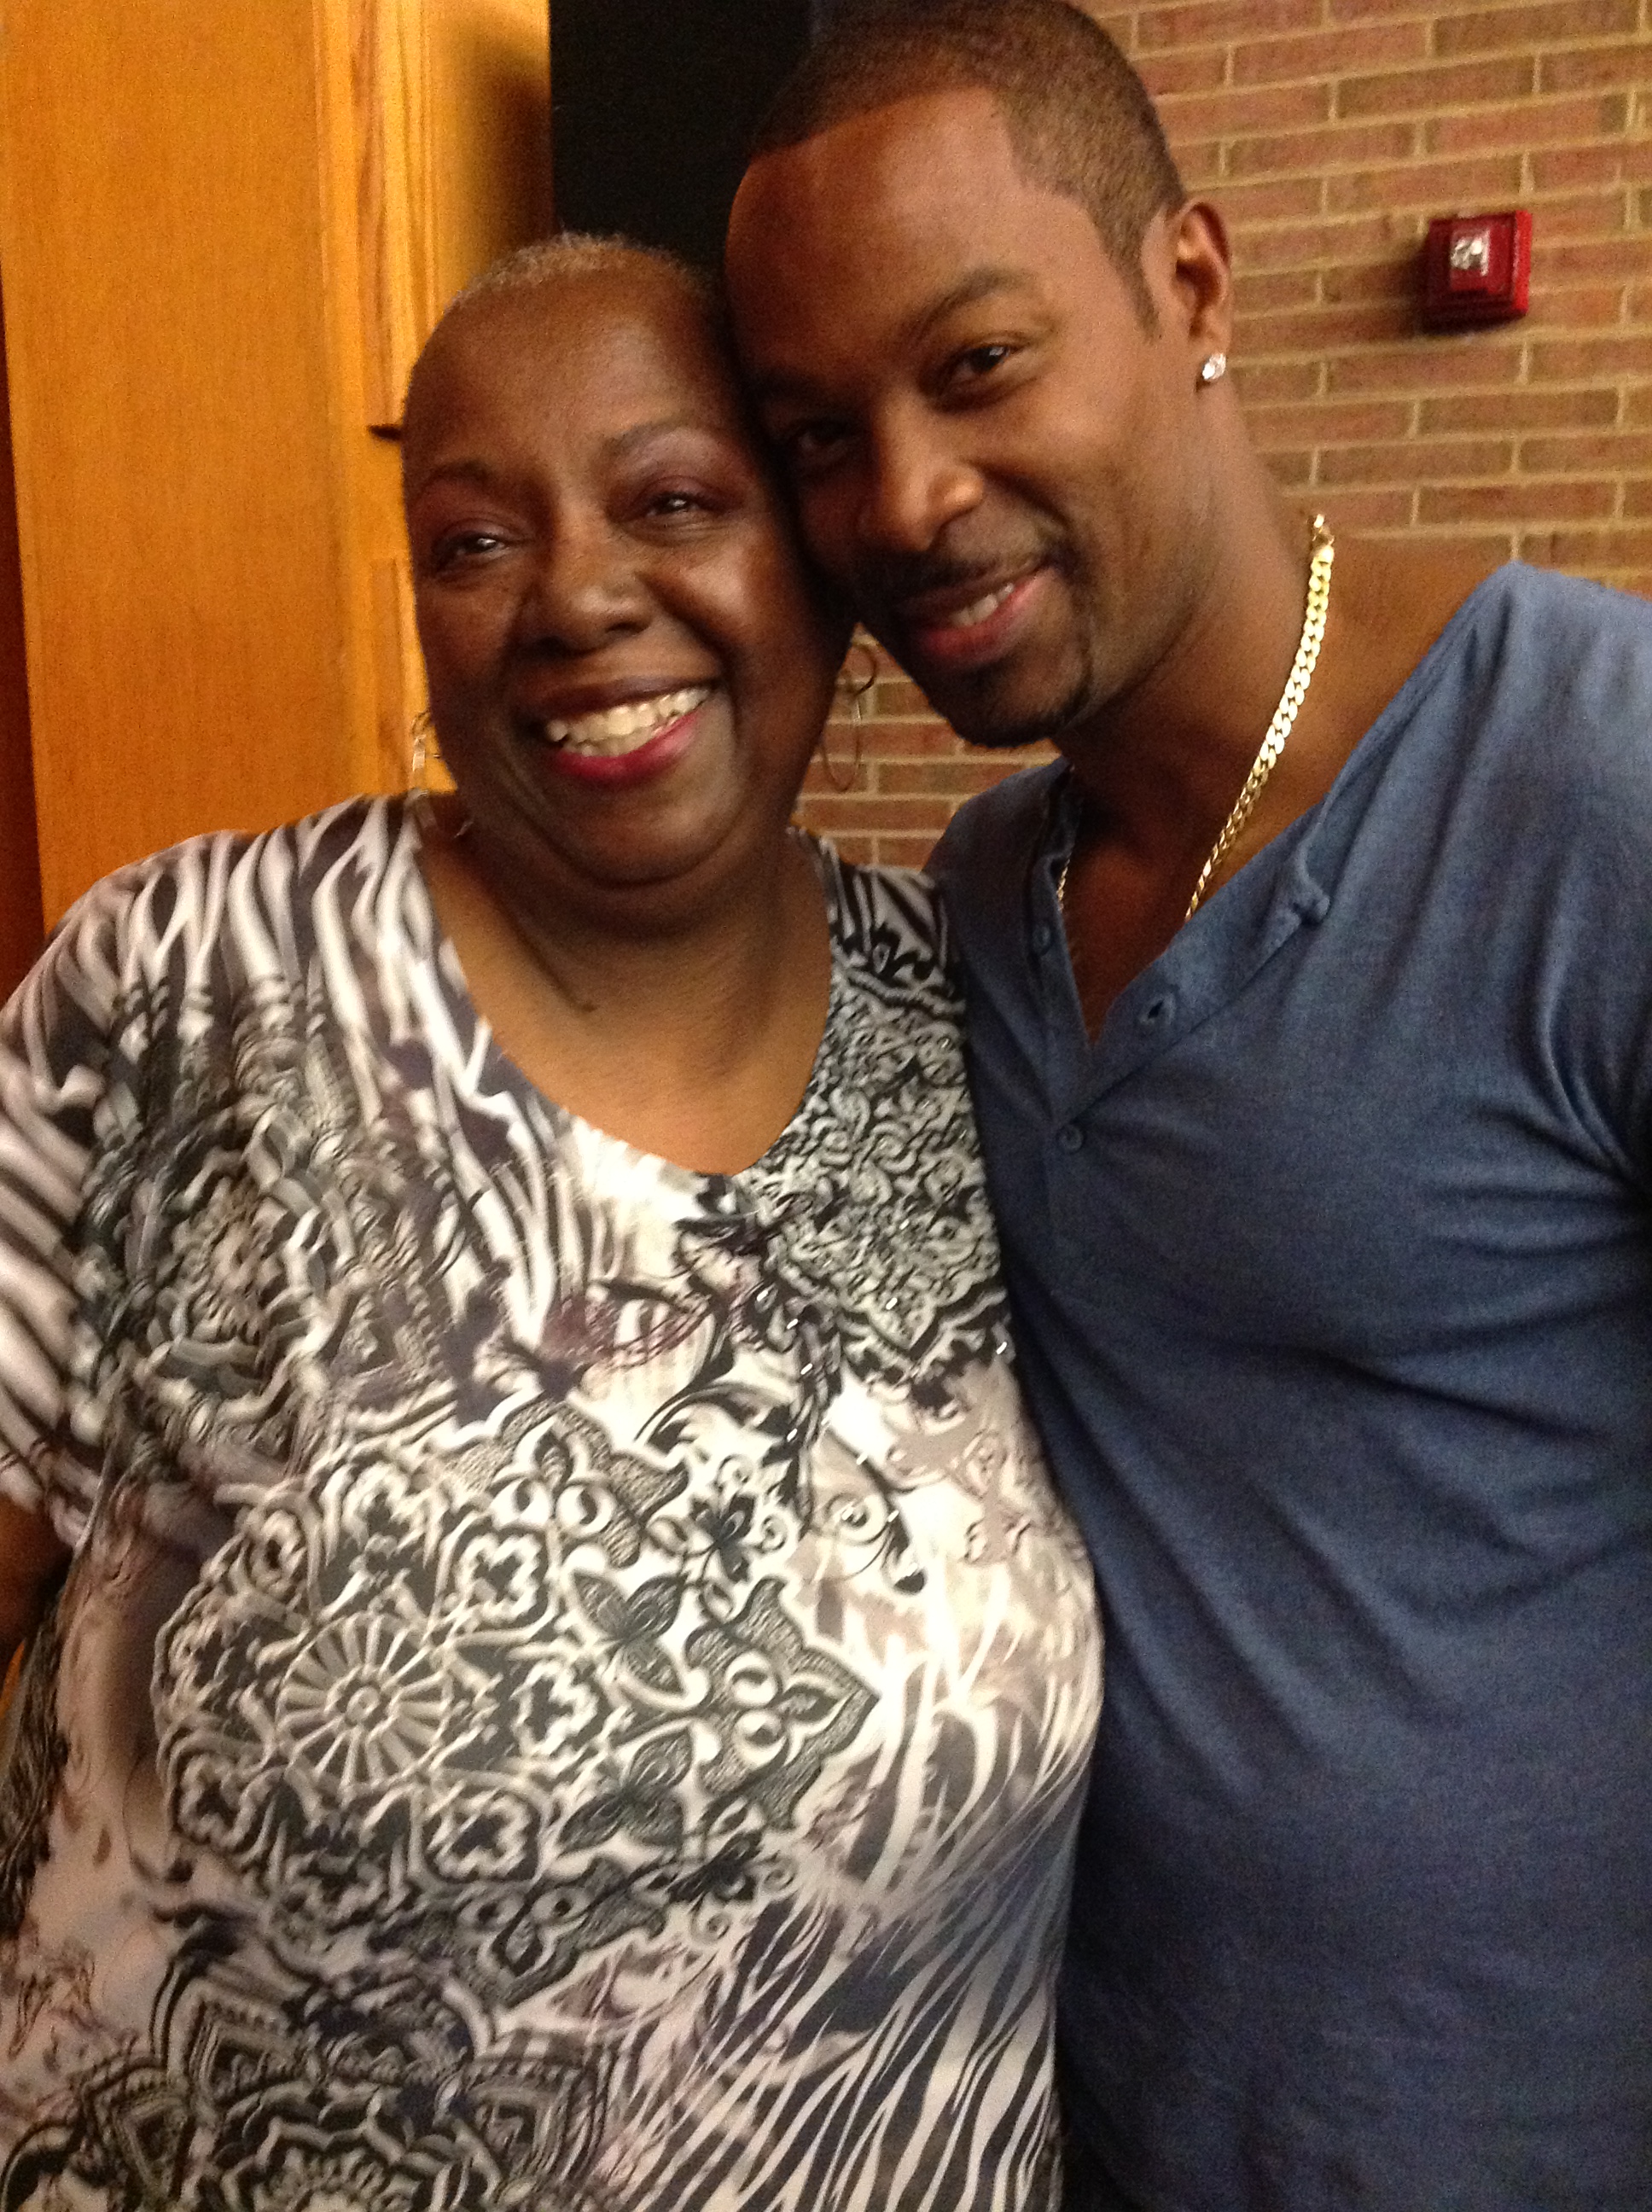 Me and Darrin Henson (Soul Food)at a workshop he taught at Howard University in Washington, DC